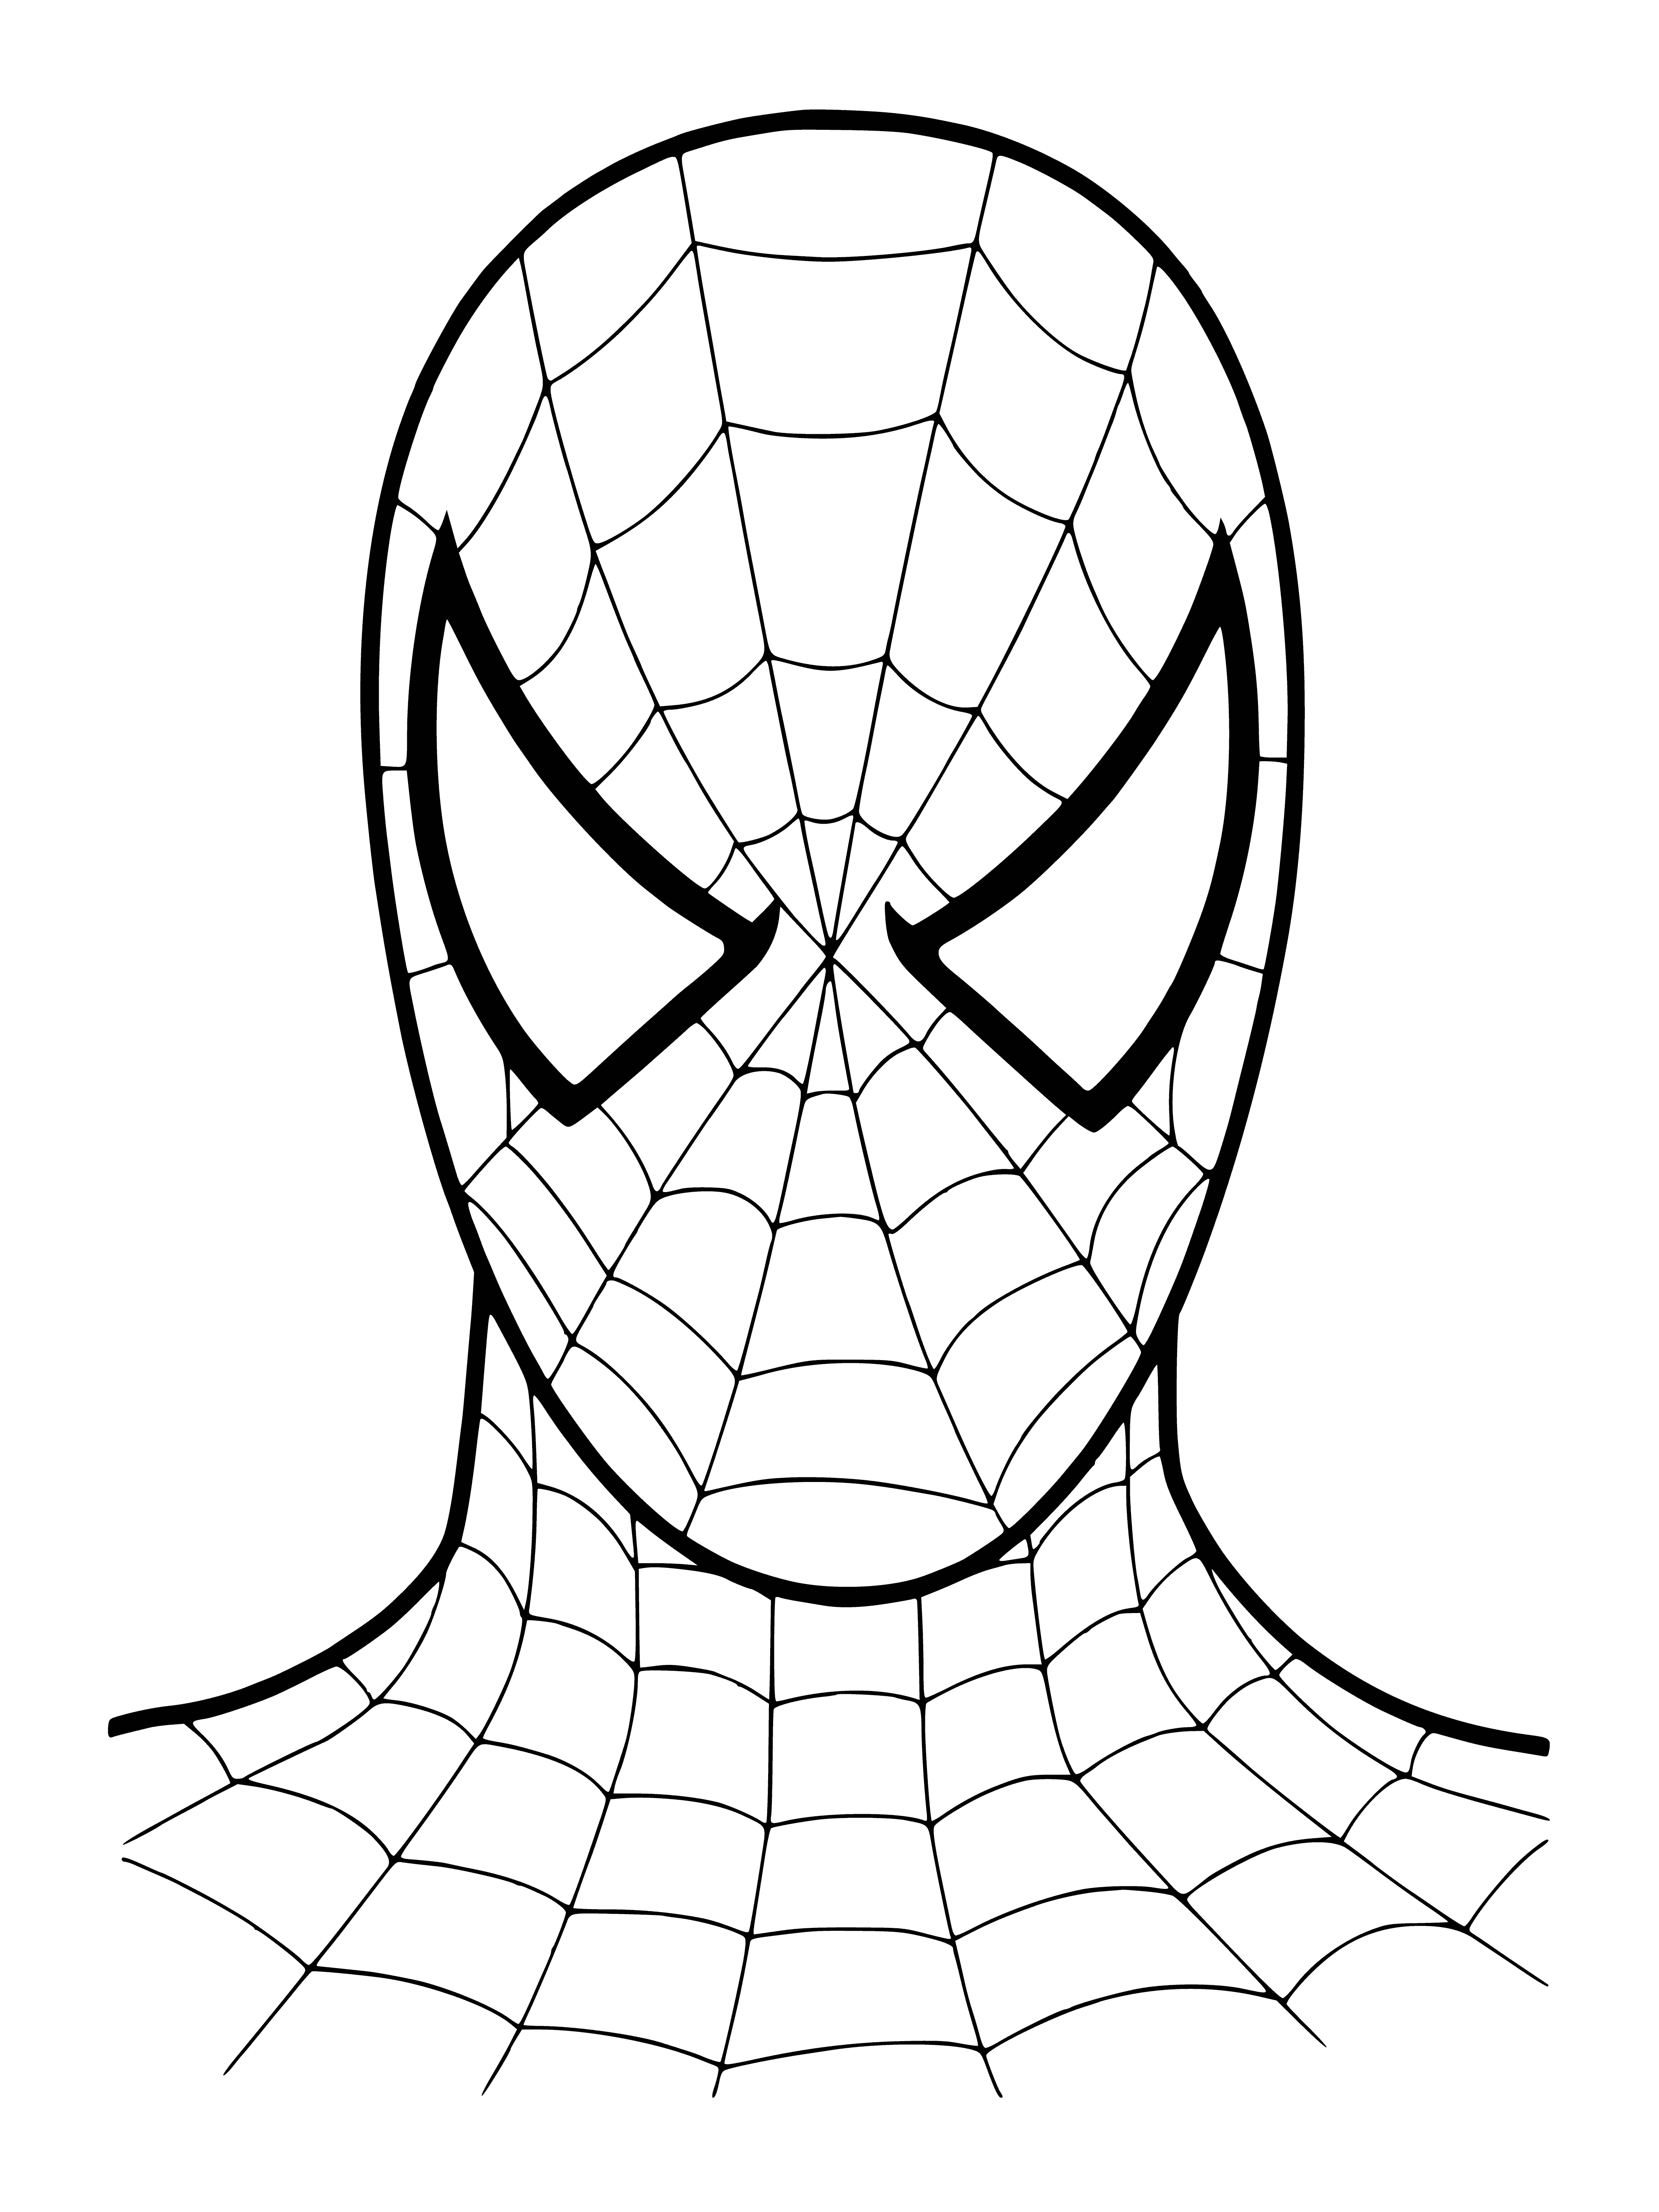 coloring page: Replica Spiderman mask made of red/blue fabric w/ 2 eyeholes & black spider emblem on forehead.